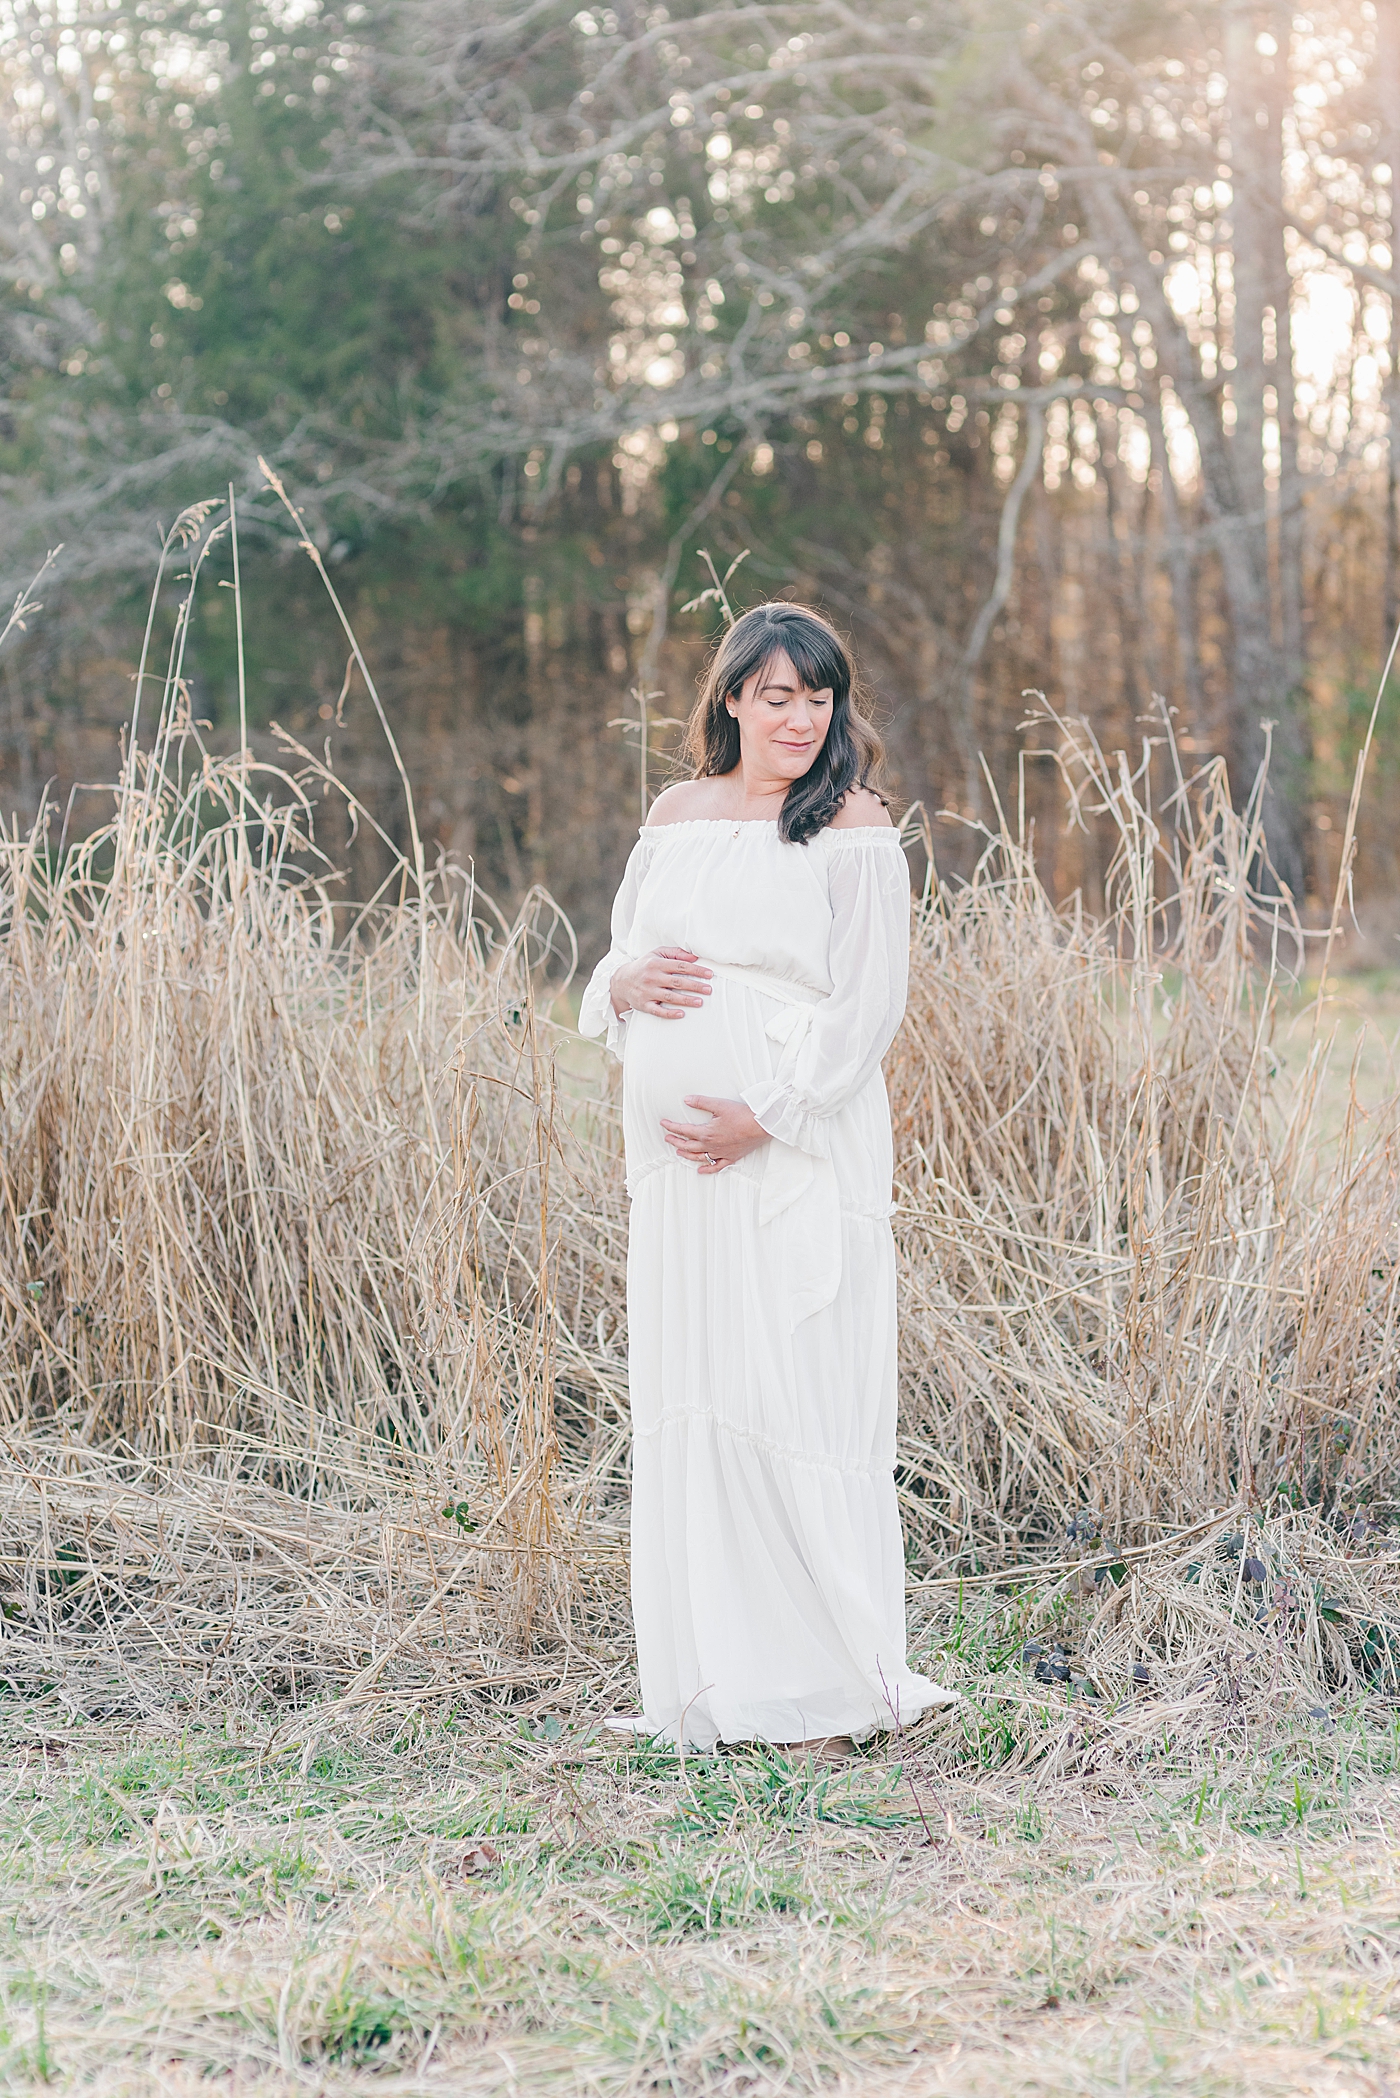 Expecting mom in long white dress in a field during Davidson maternity session | Photo by Anna Wisjo Photography